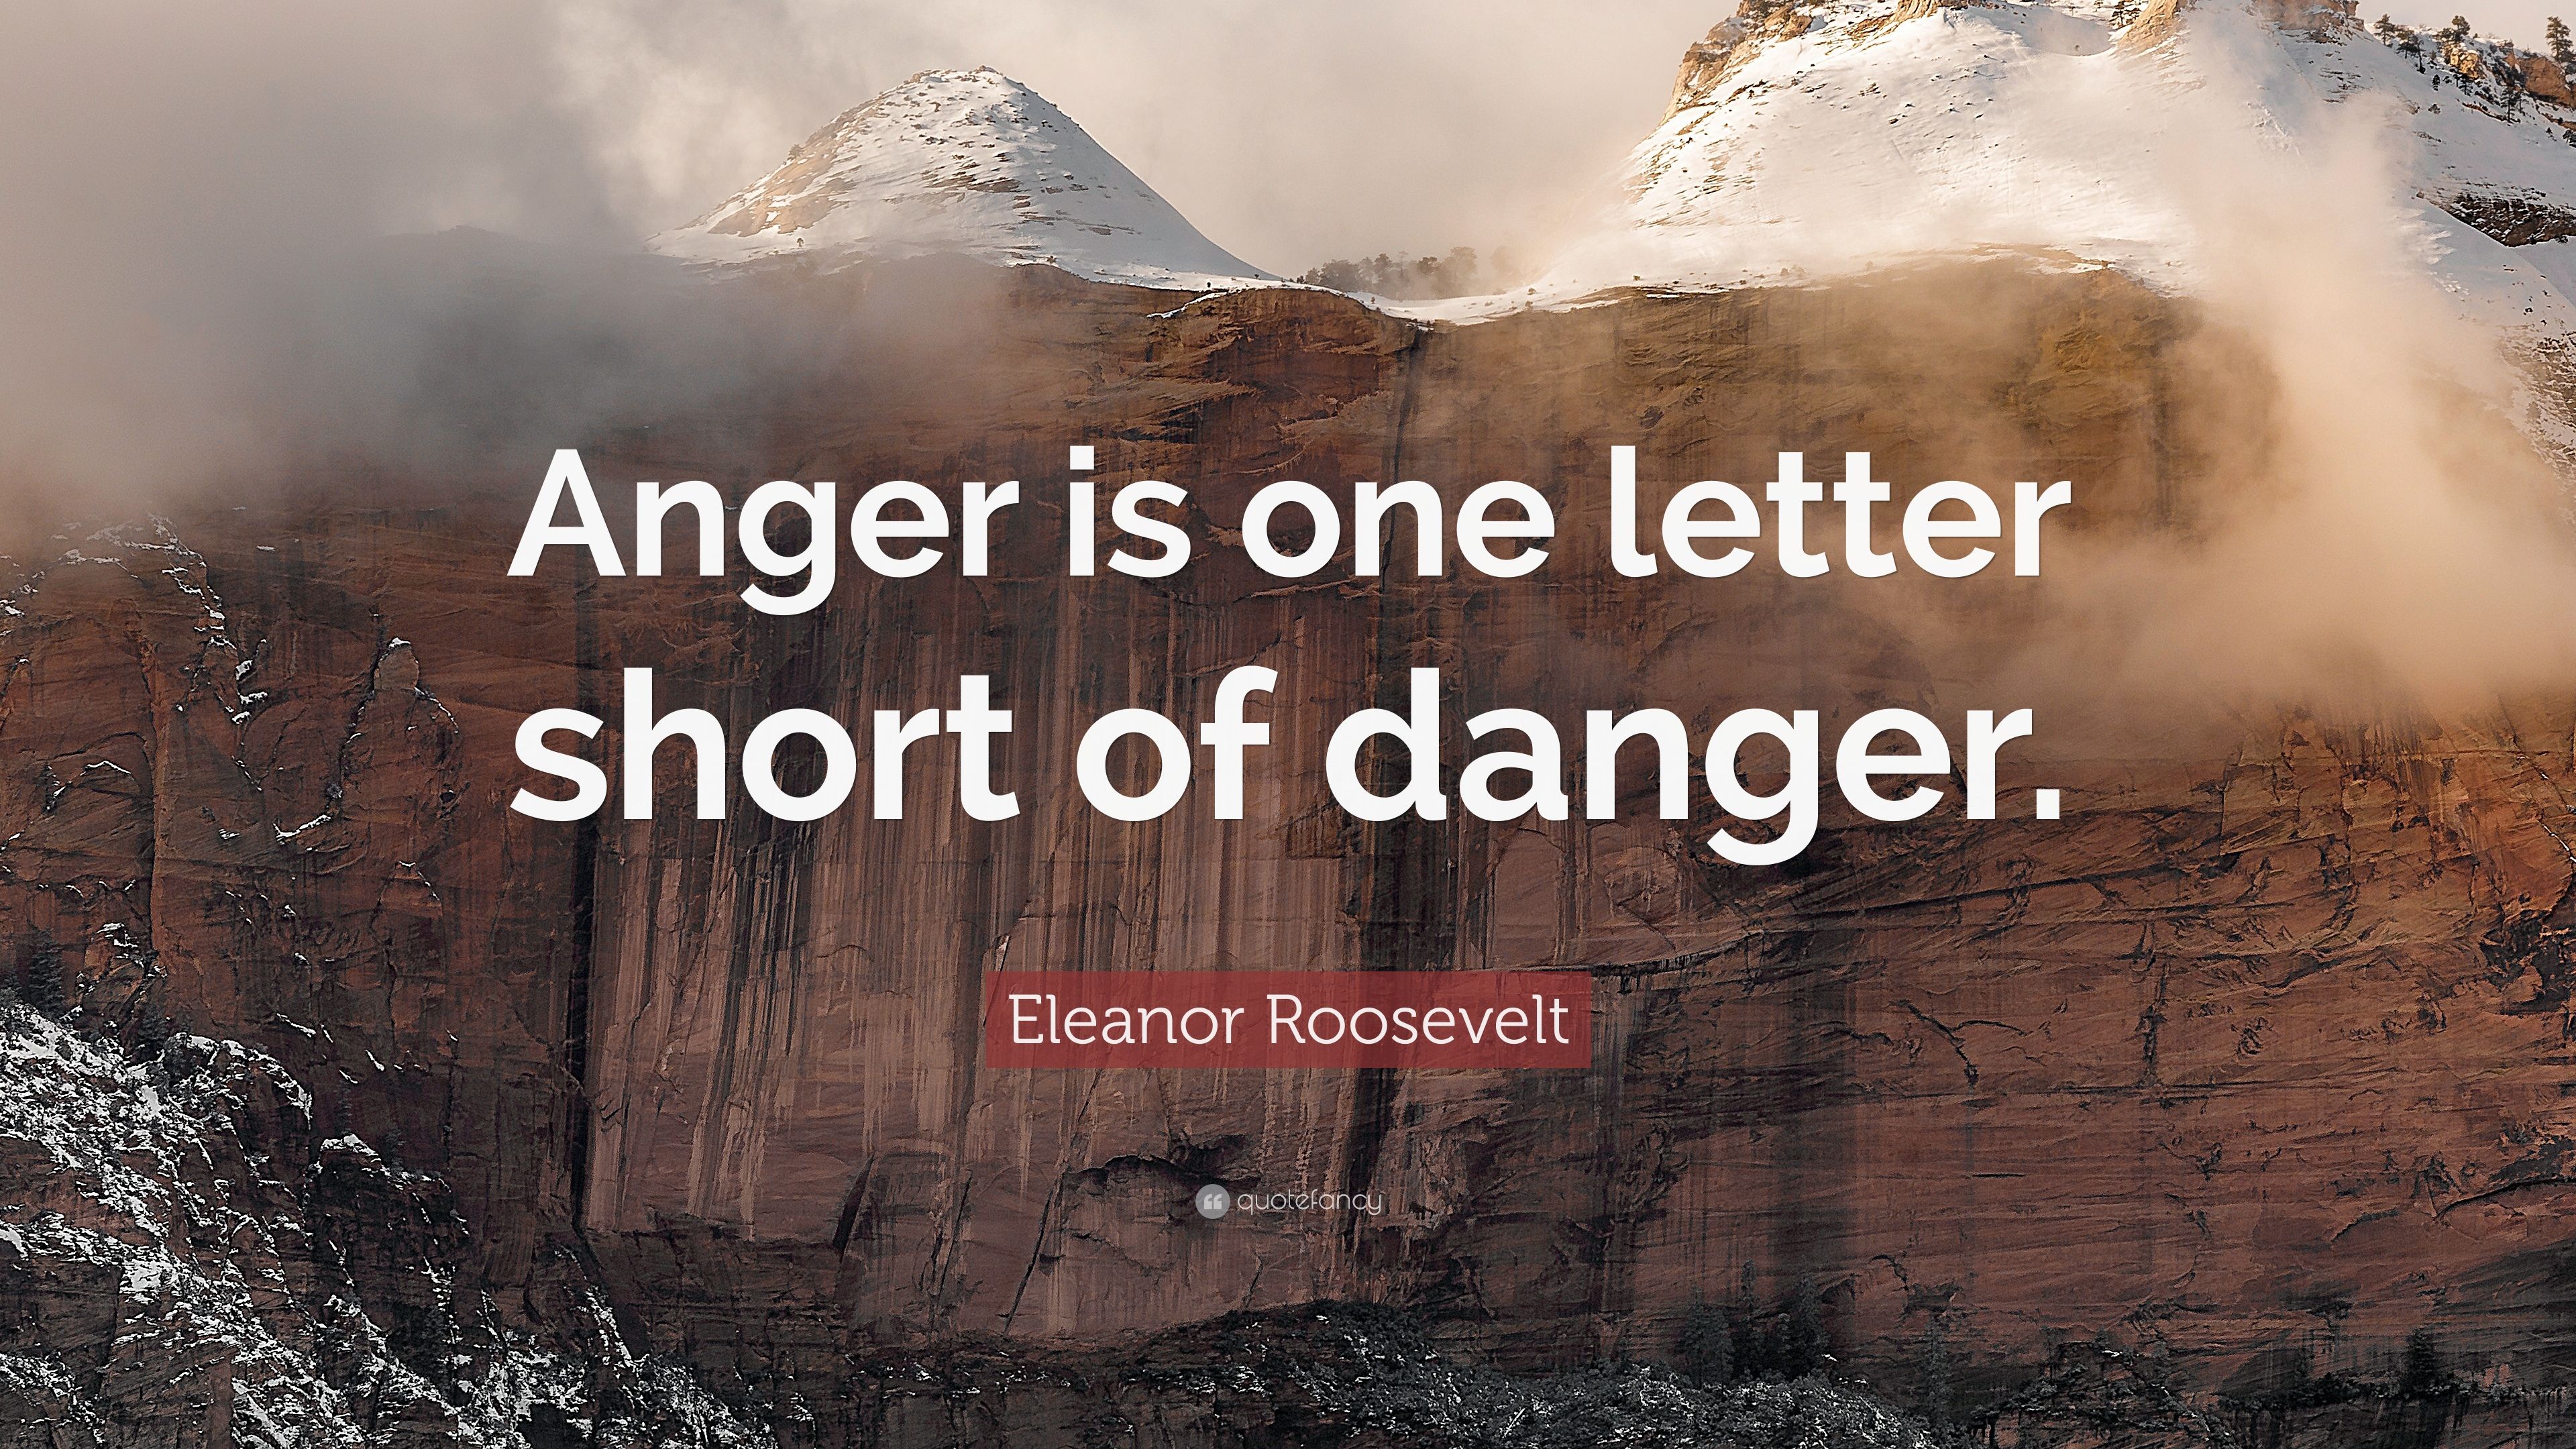 Eleanor Roosevelt Quote Is Mother Of Skill HD Wallpaper